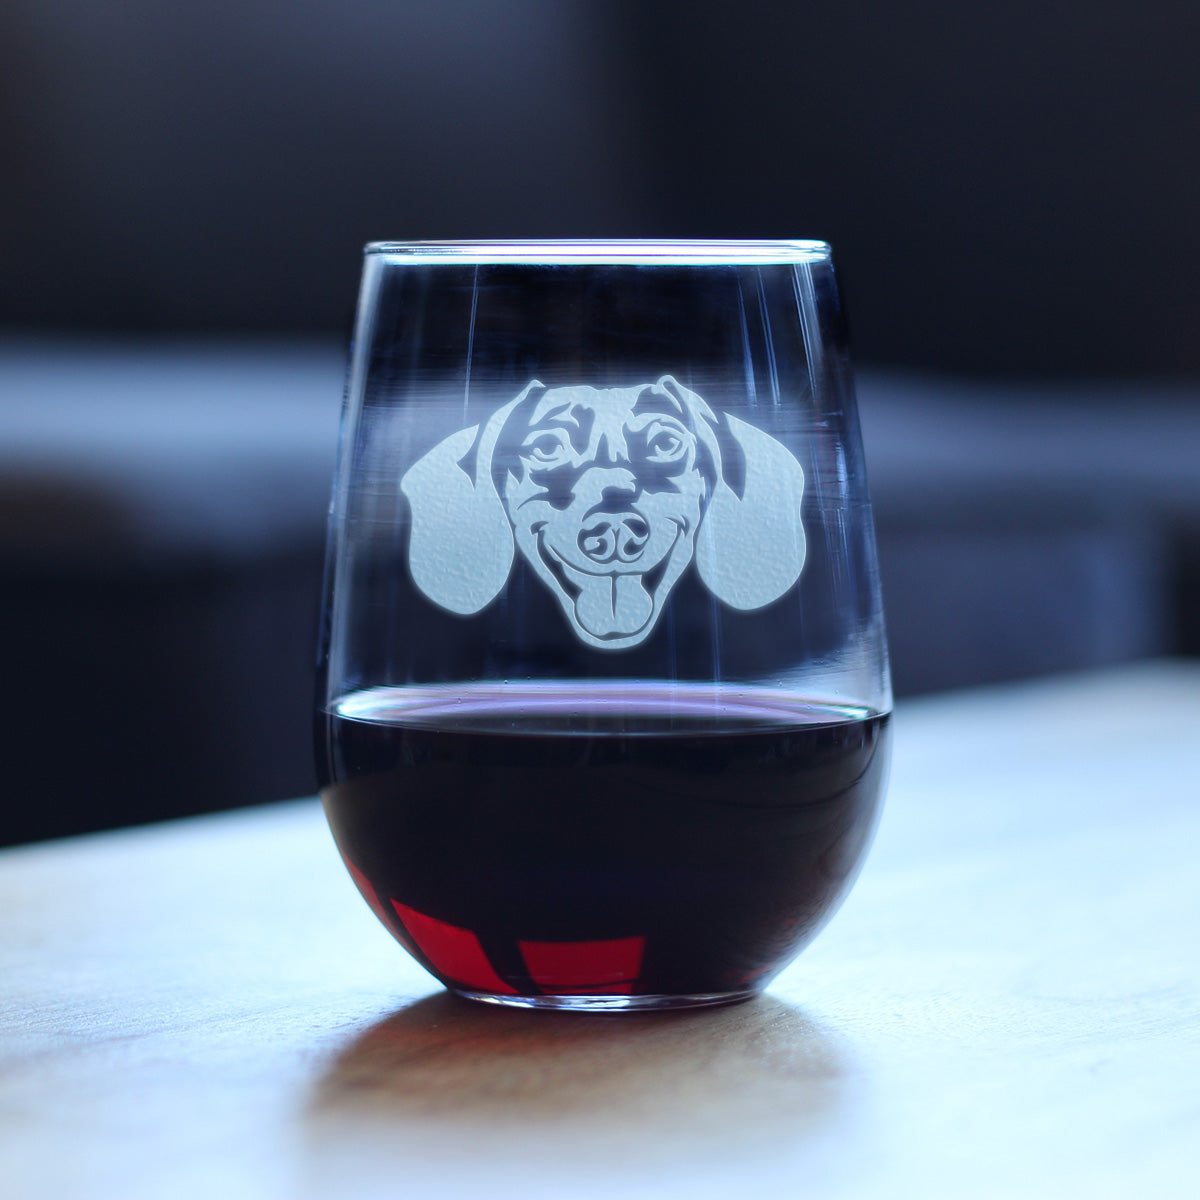 Dachshund Face Stemless Wine Glass - Cute Dog Themed Decor and Gifts for Moms &amp; Dads of Dachshunds - Large 17 Oz